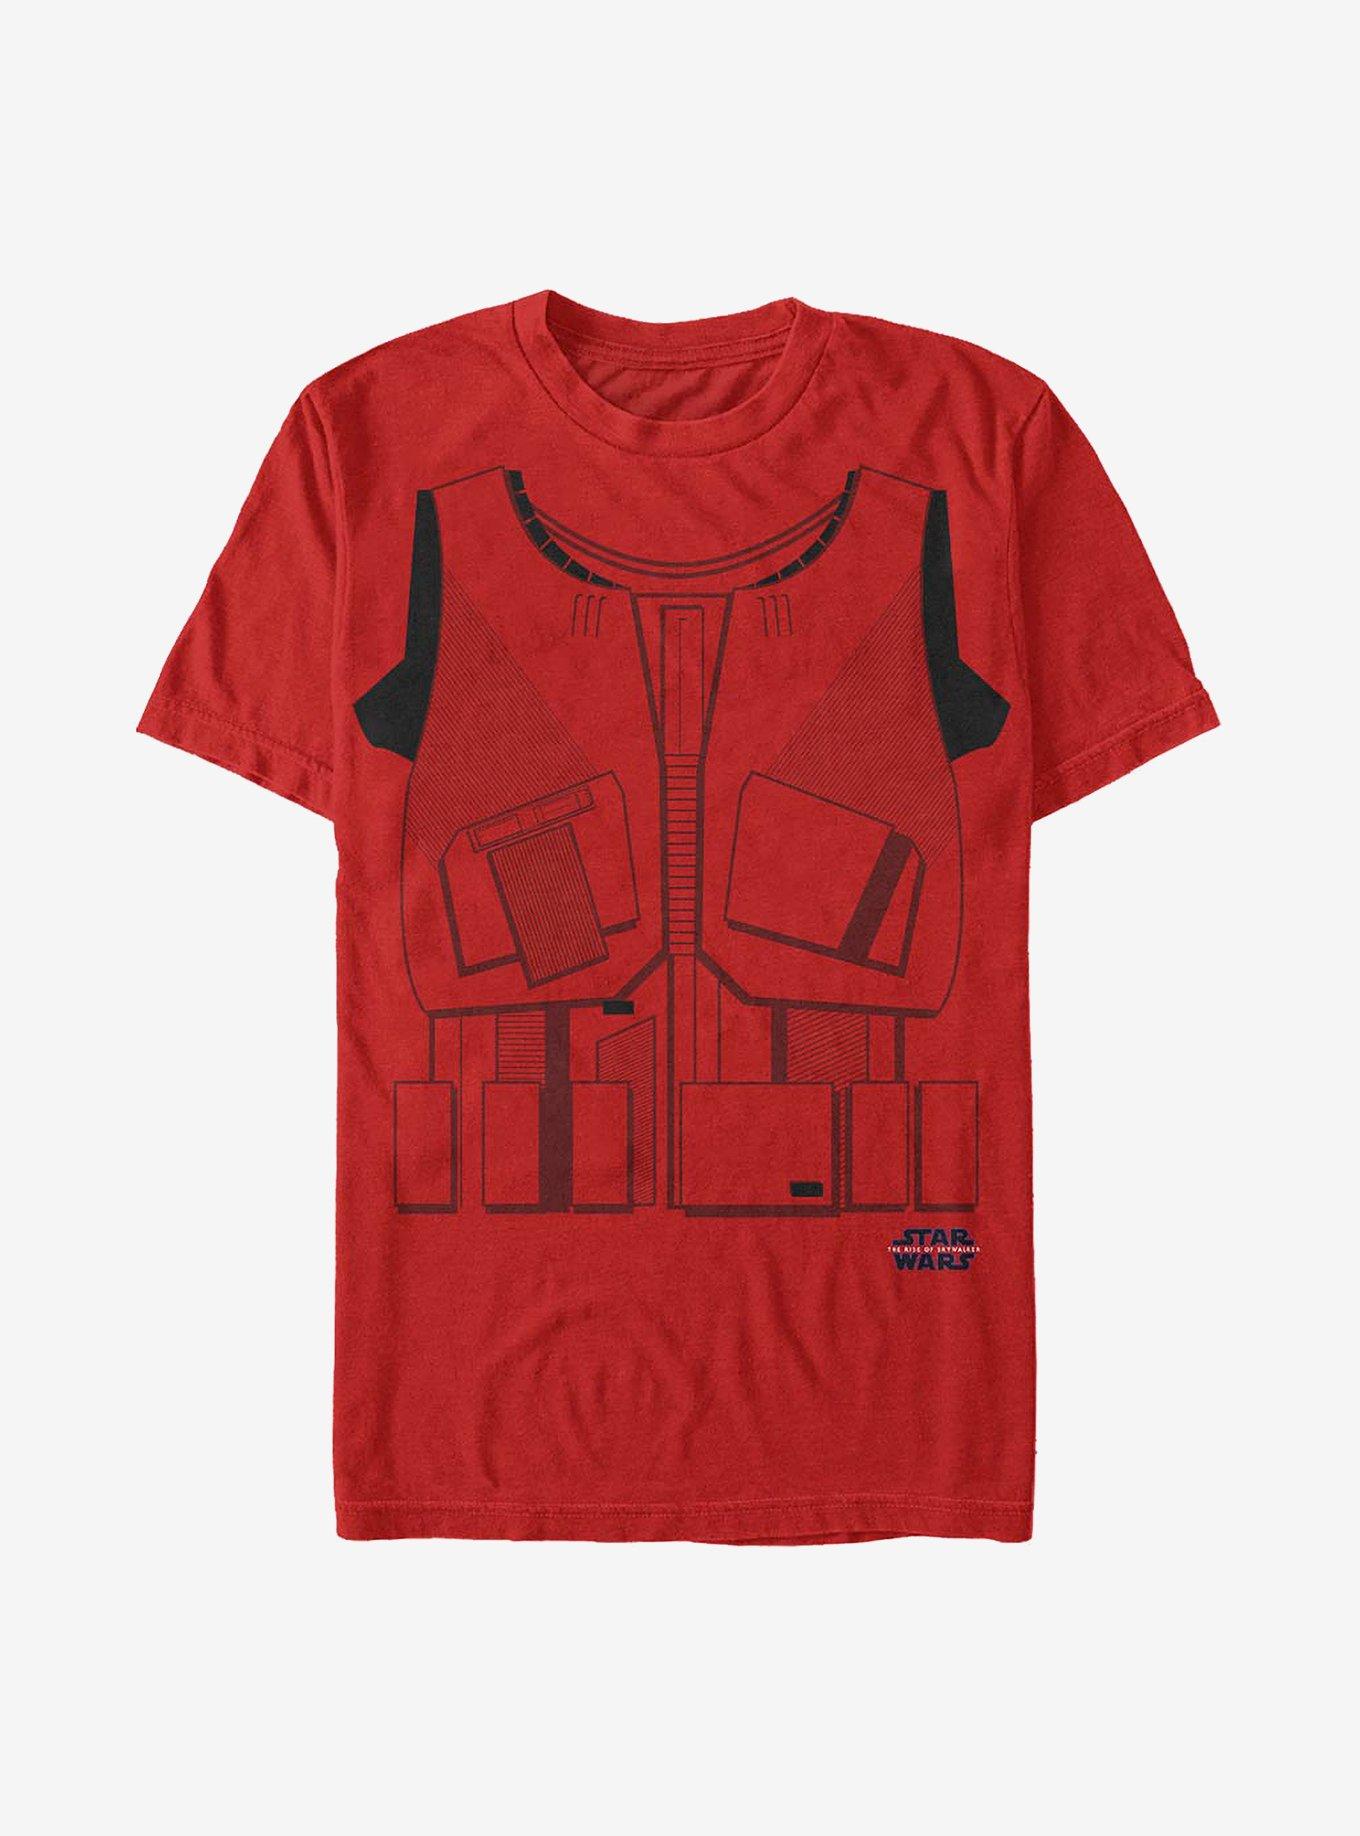 Star Wars: The Rise Of Skywalker Sith Costume T-Shirt, RED, hi-res